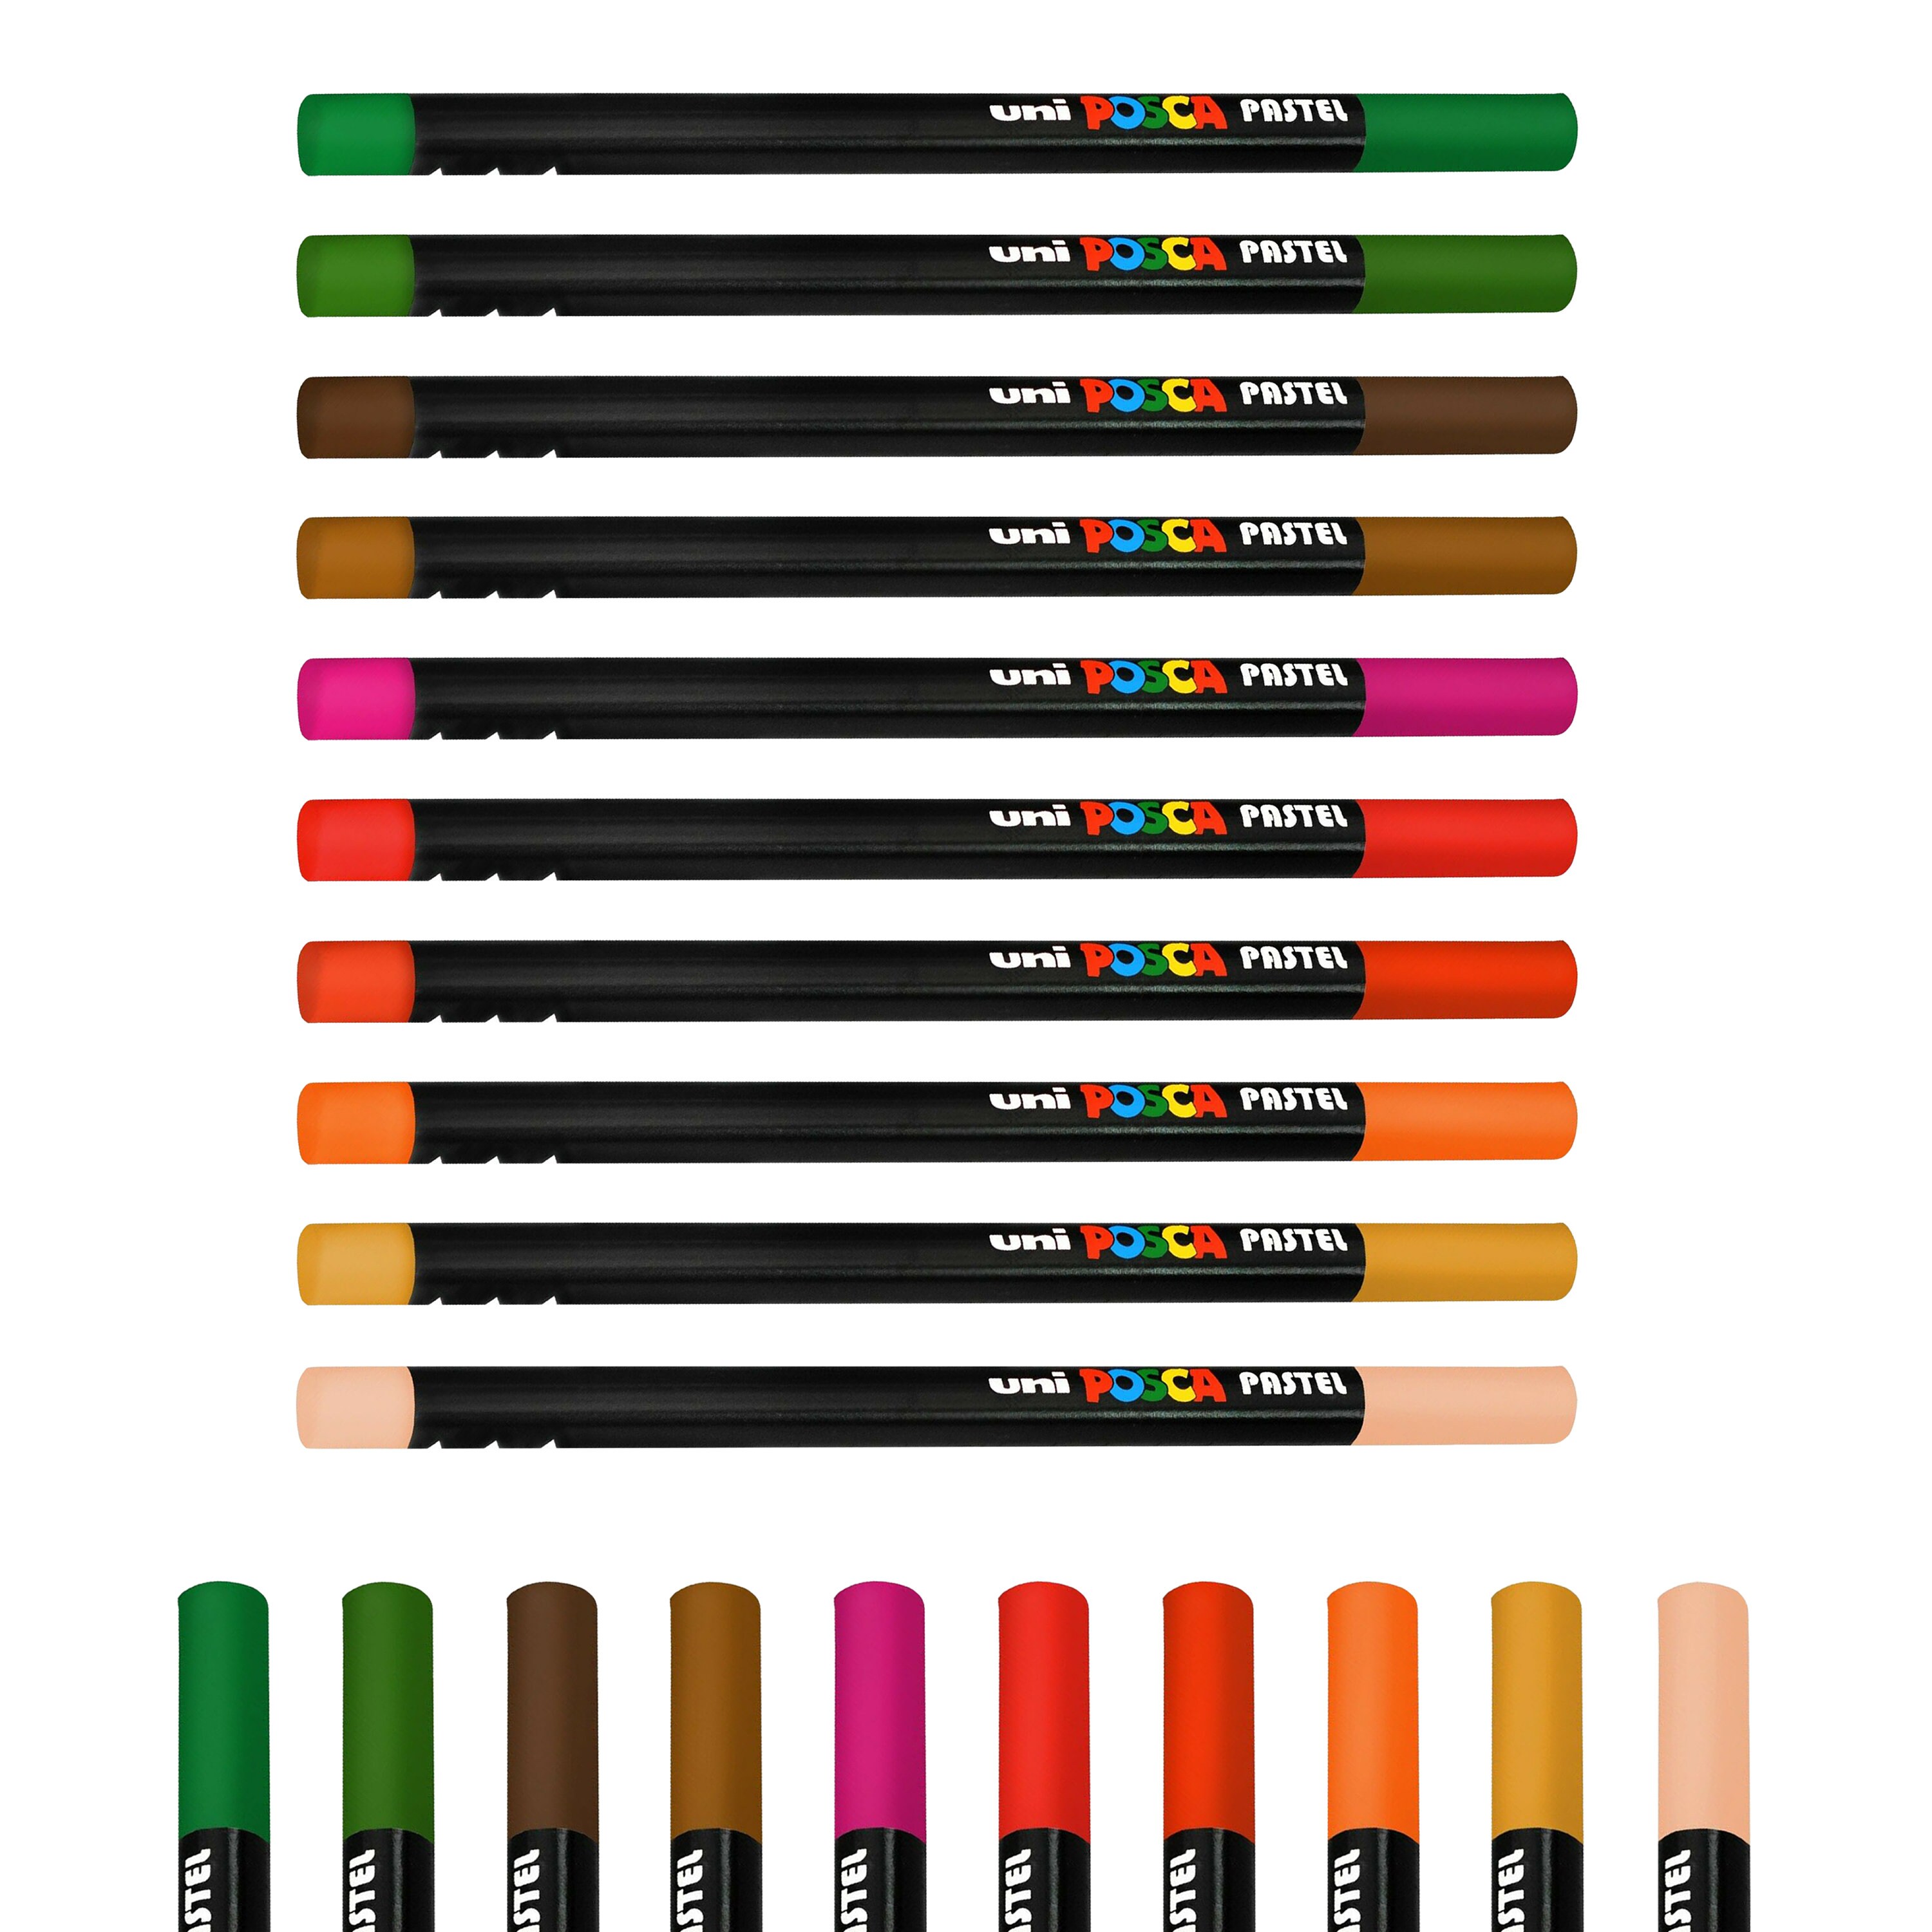 New POSCA Pencil and Pastel packs give artists a wealth of creative options  - uni-ball Germany